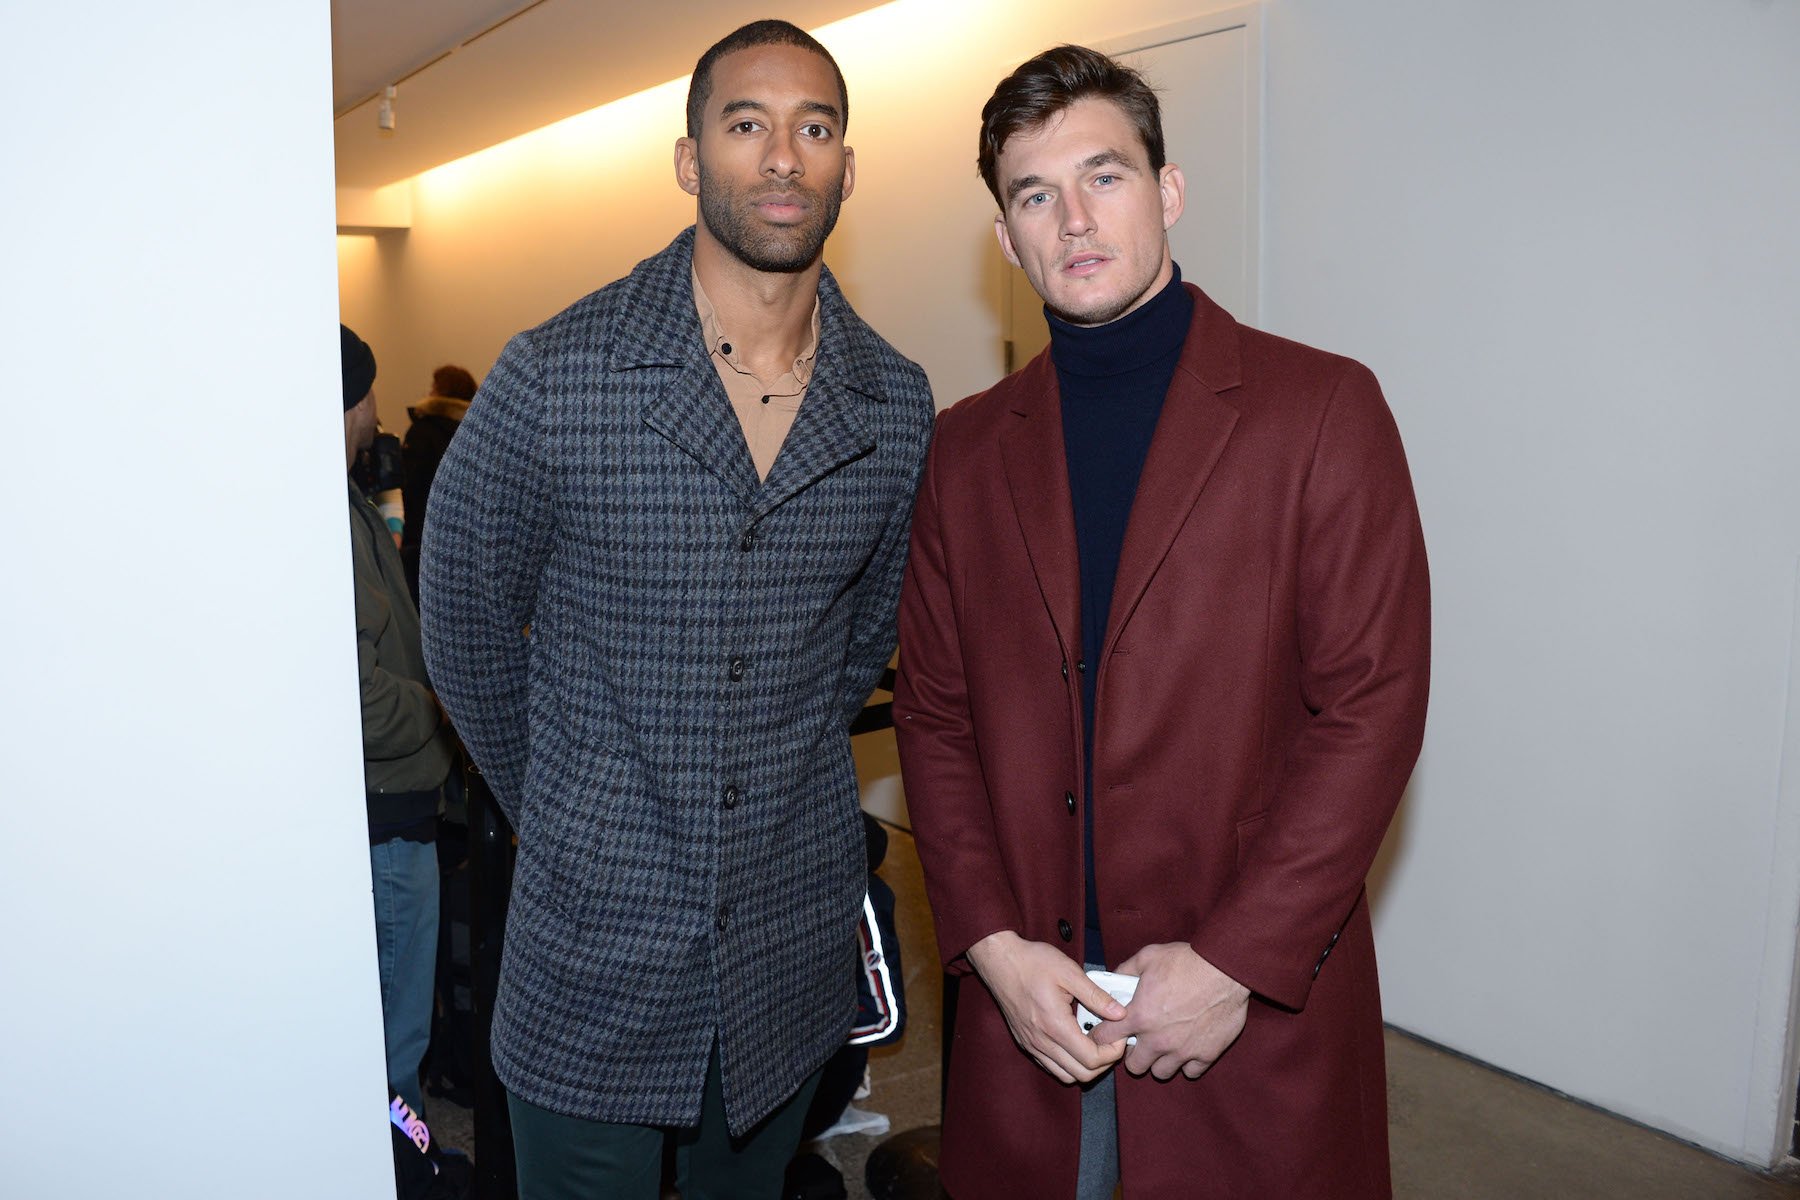 Matt James from 'The Bachelor' and Tyler Cameron from 'The Bachelorette' standing together at a fashion show